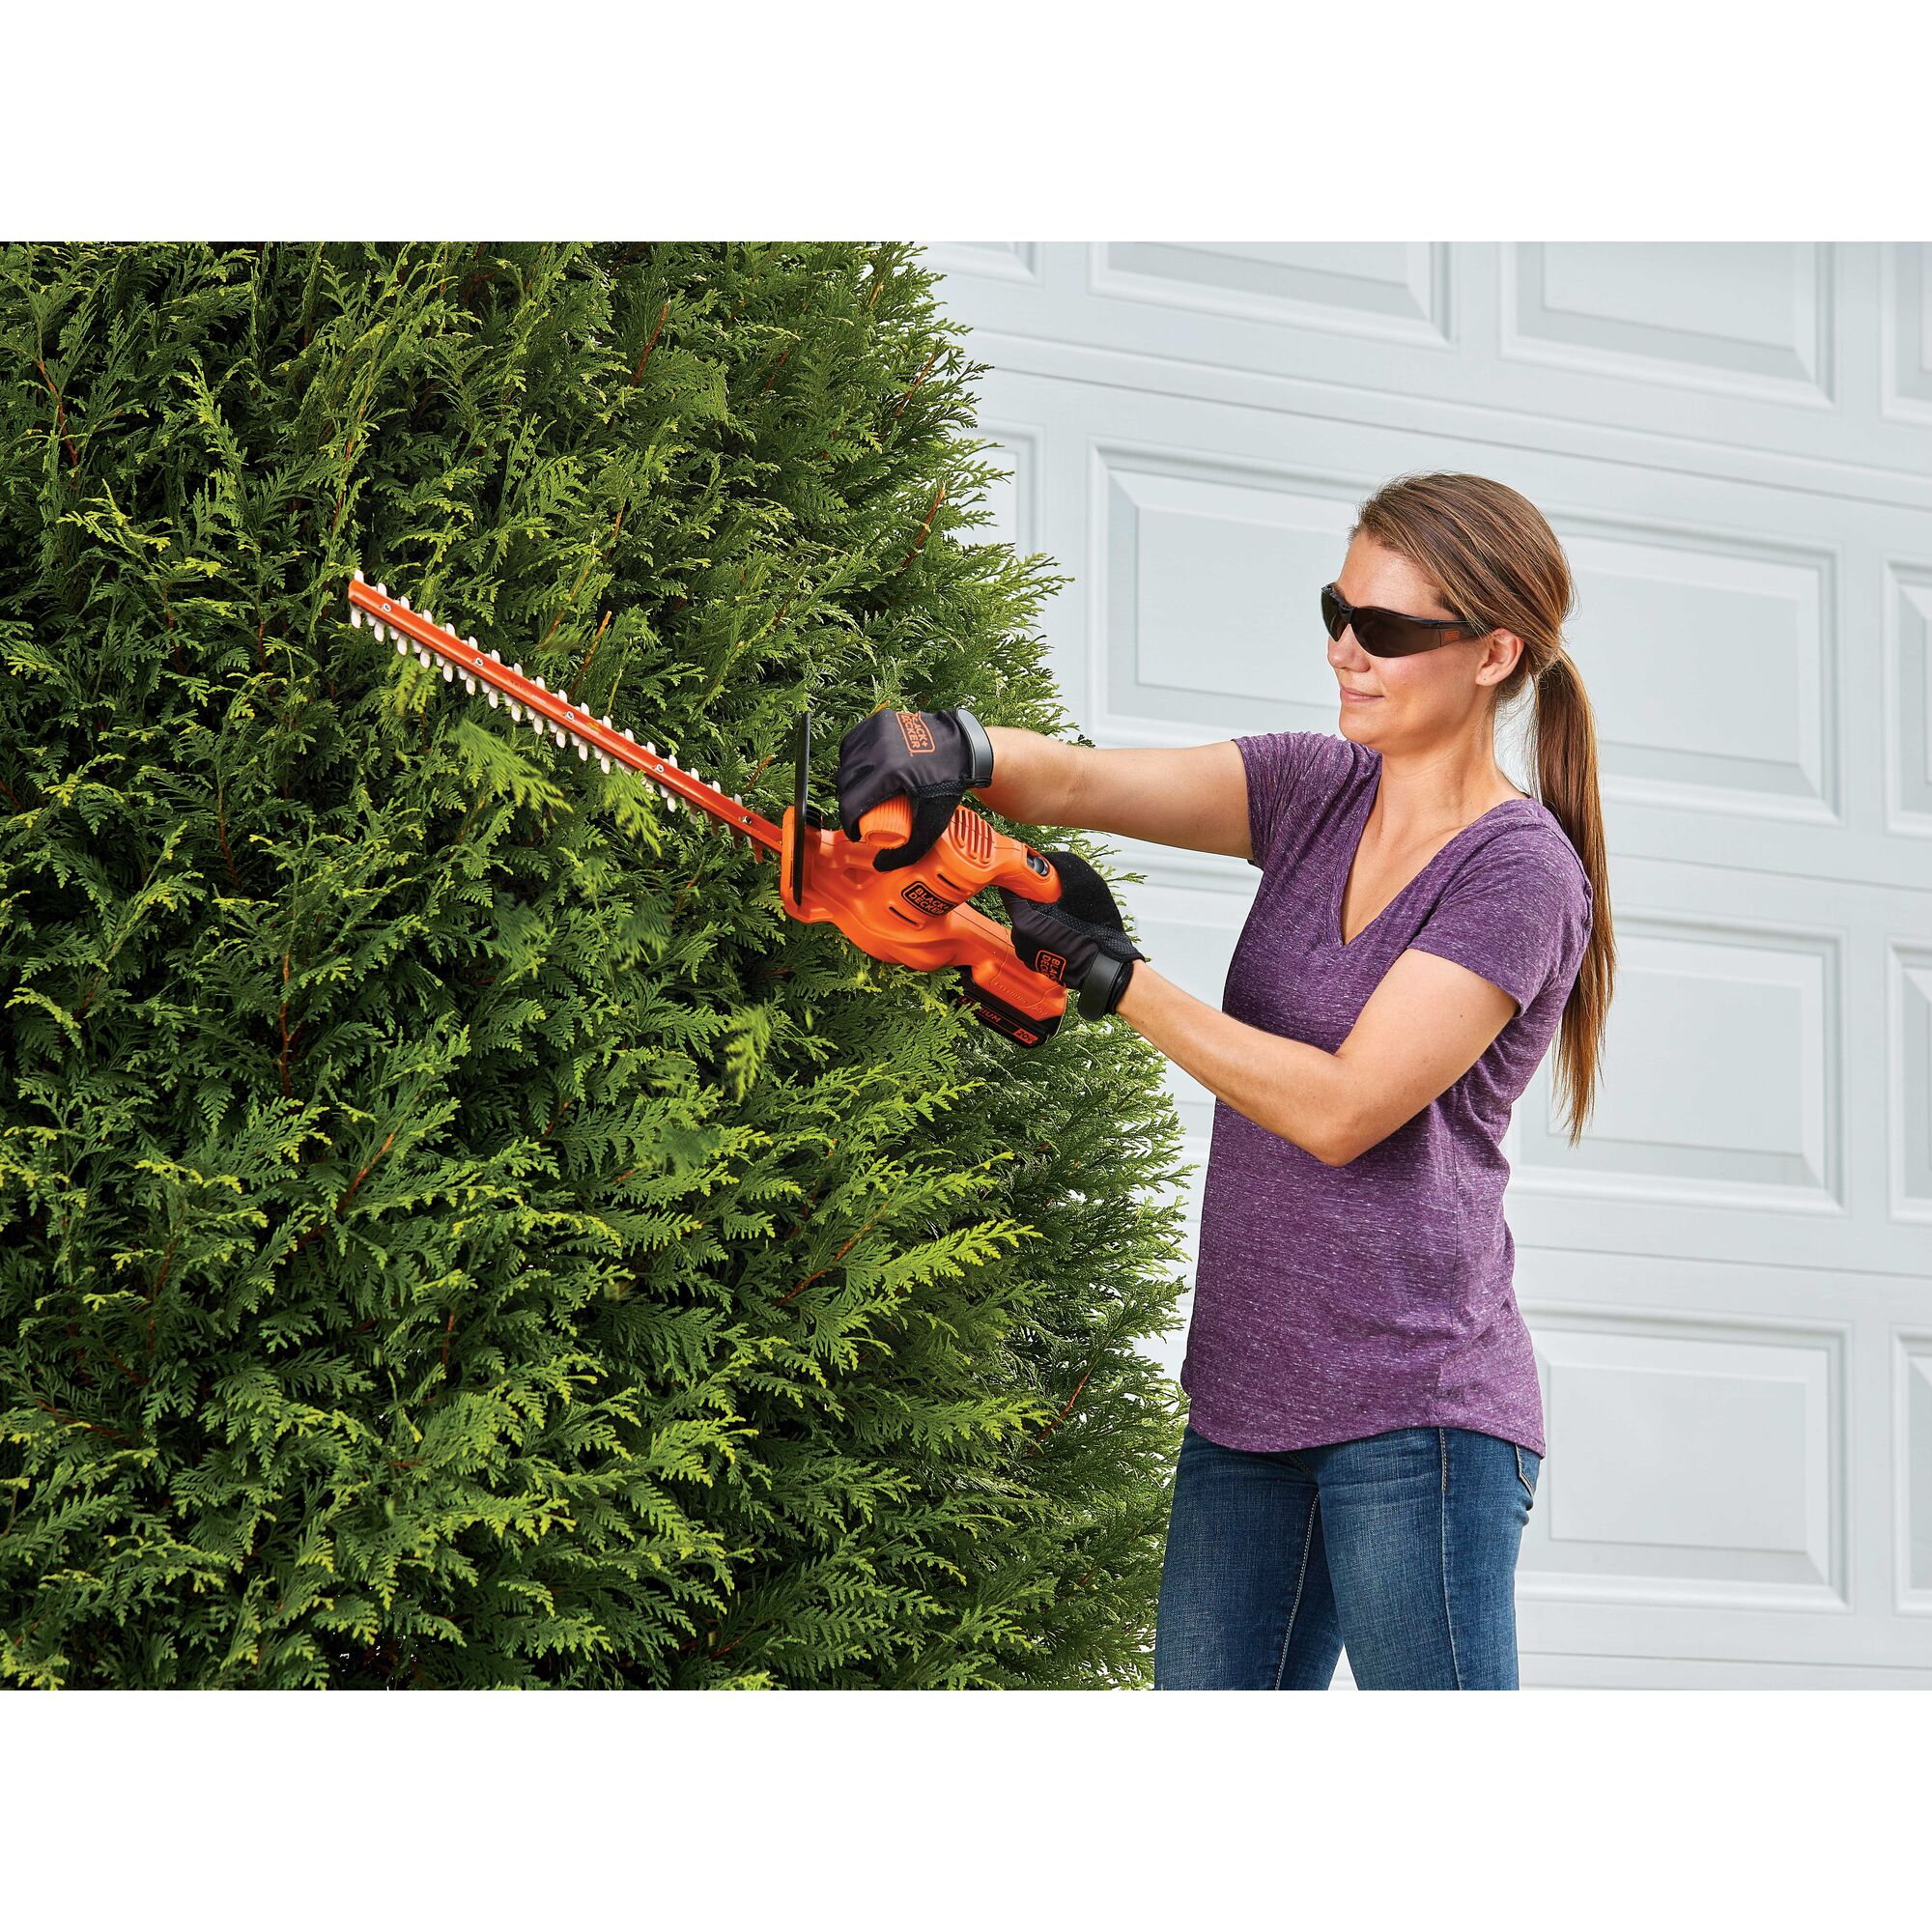 18 inch Cordless Hedge Trimmer being used by person to trim hedge outdoors.